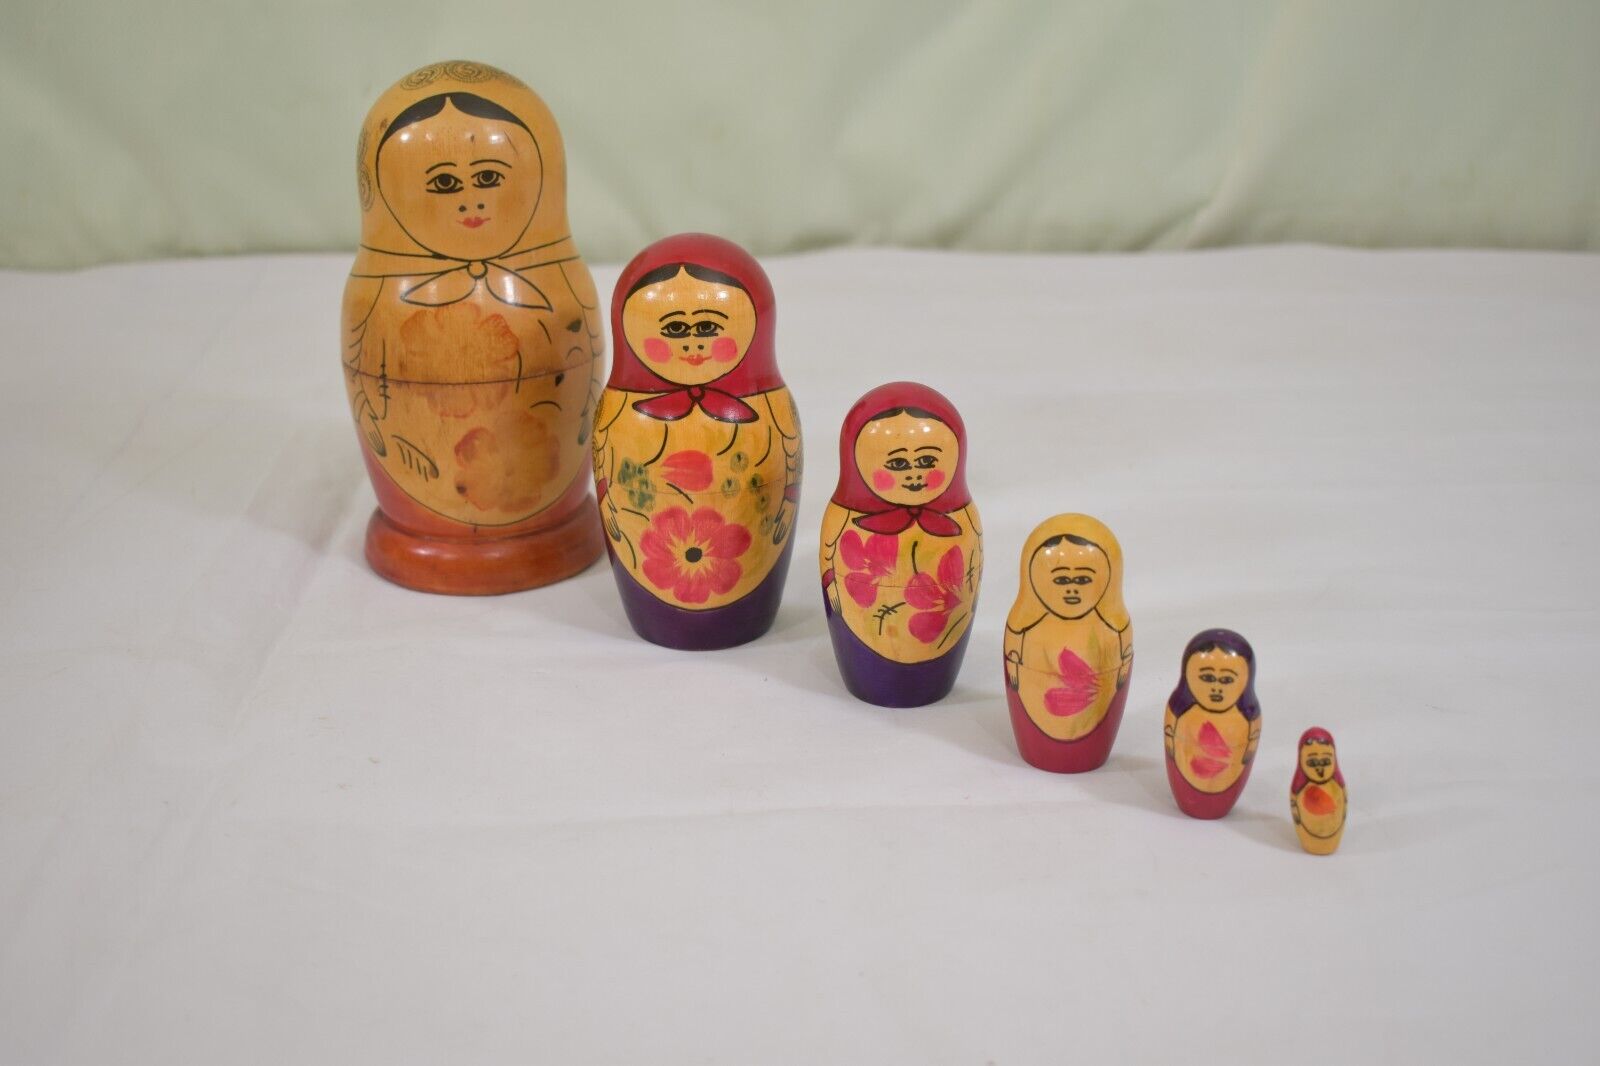 Vintage Wooden Russian Nesting Doll Set of 5 Hand Painted